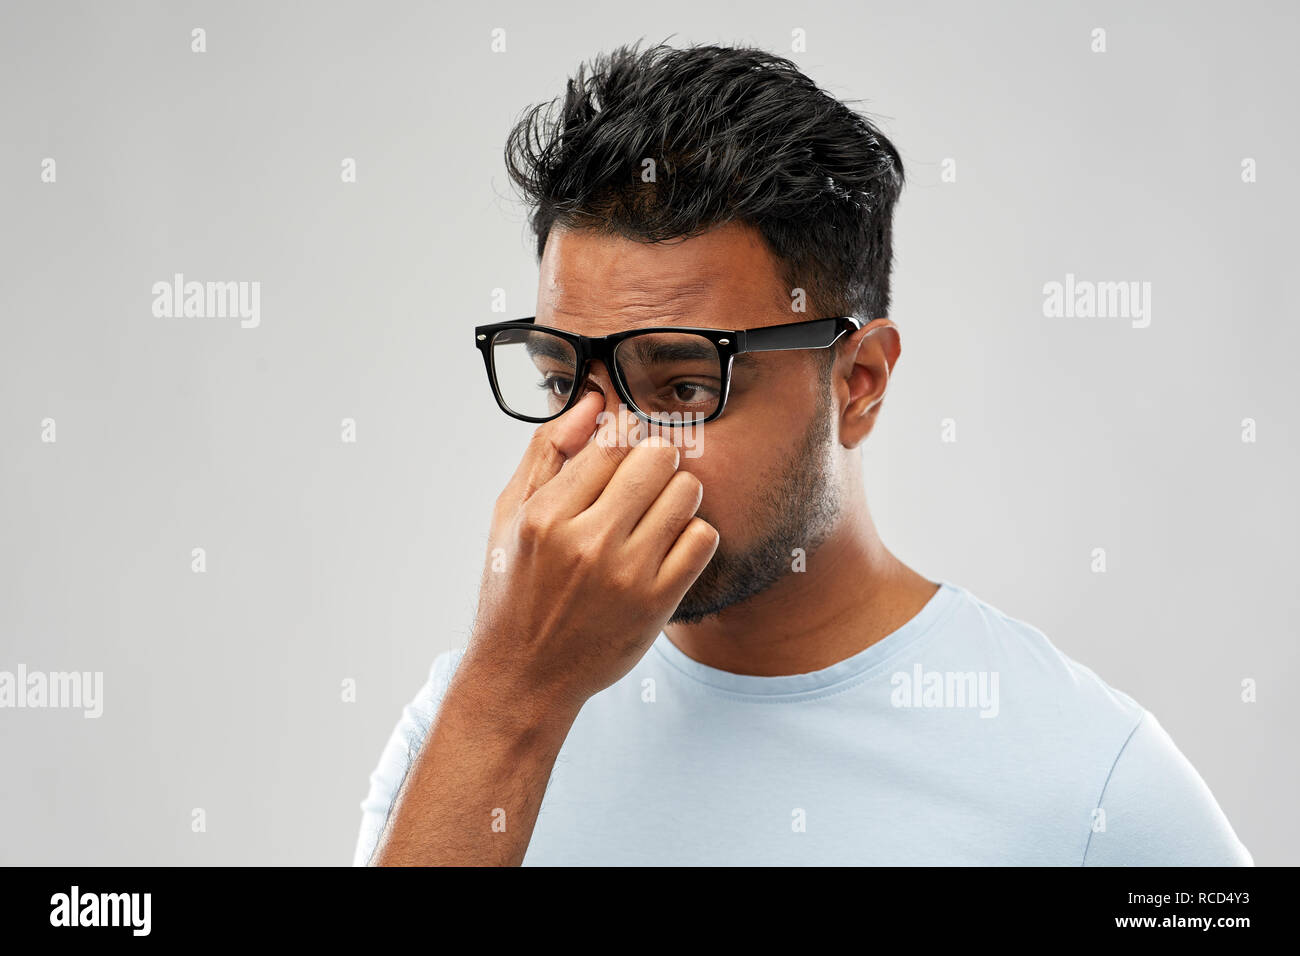 tired indian man in glasses rubbing nose bridge Stock Photo